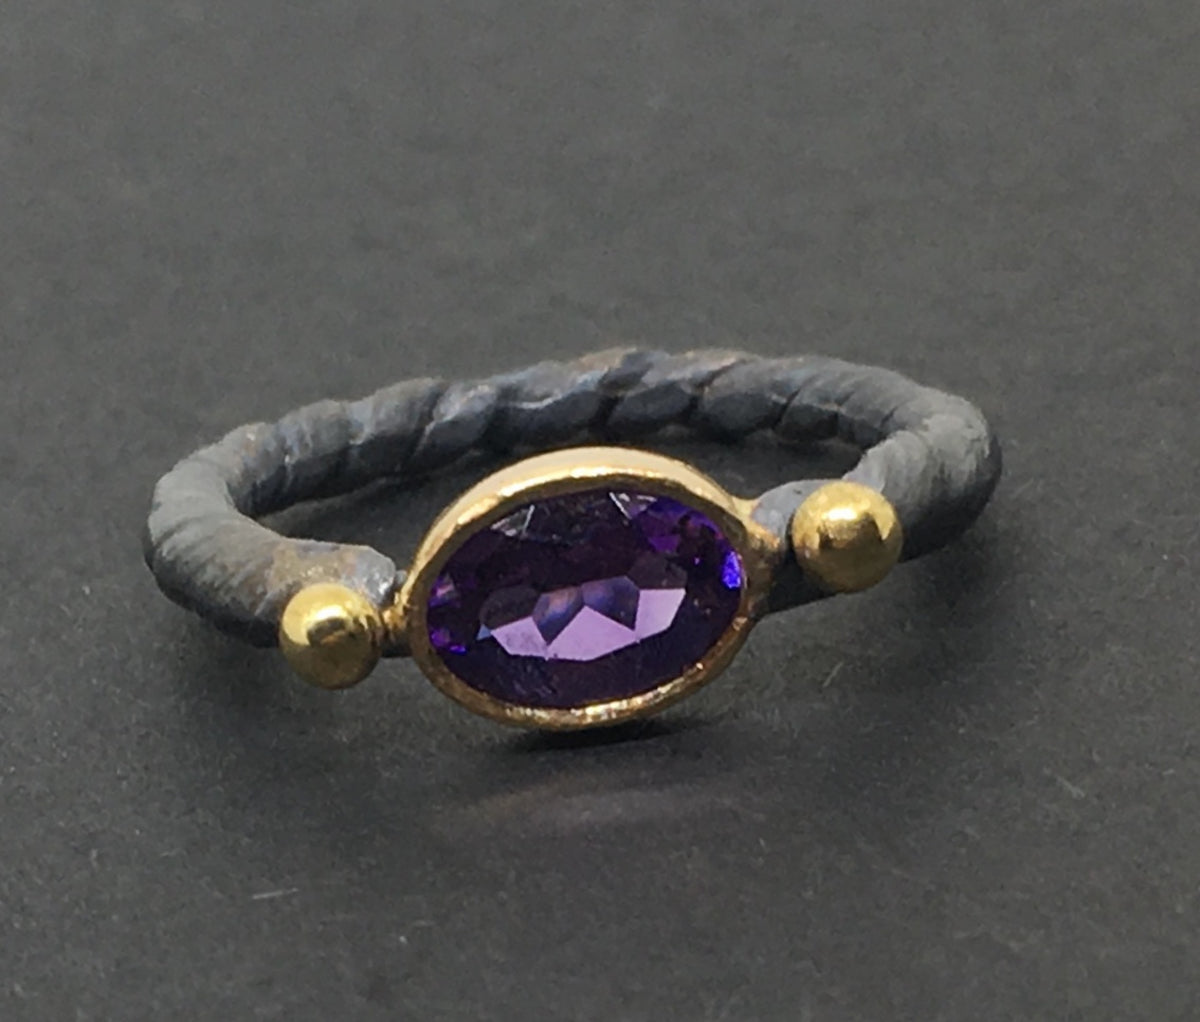 Black Sterling Silver and 14K Yellow Gold Amethyst Ring